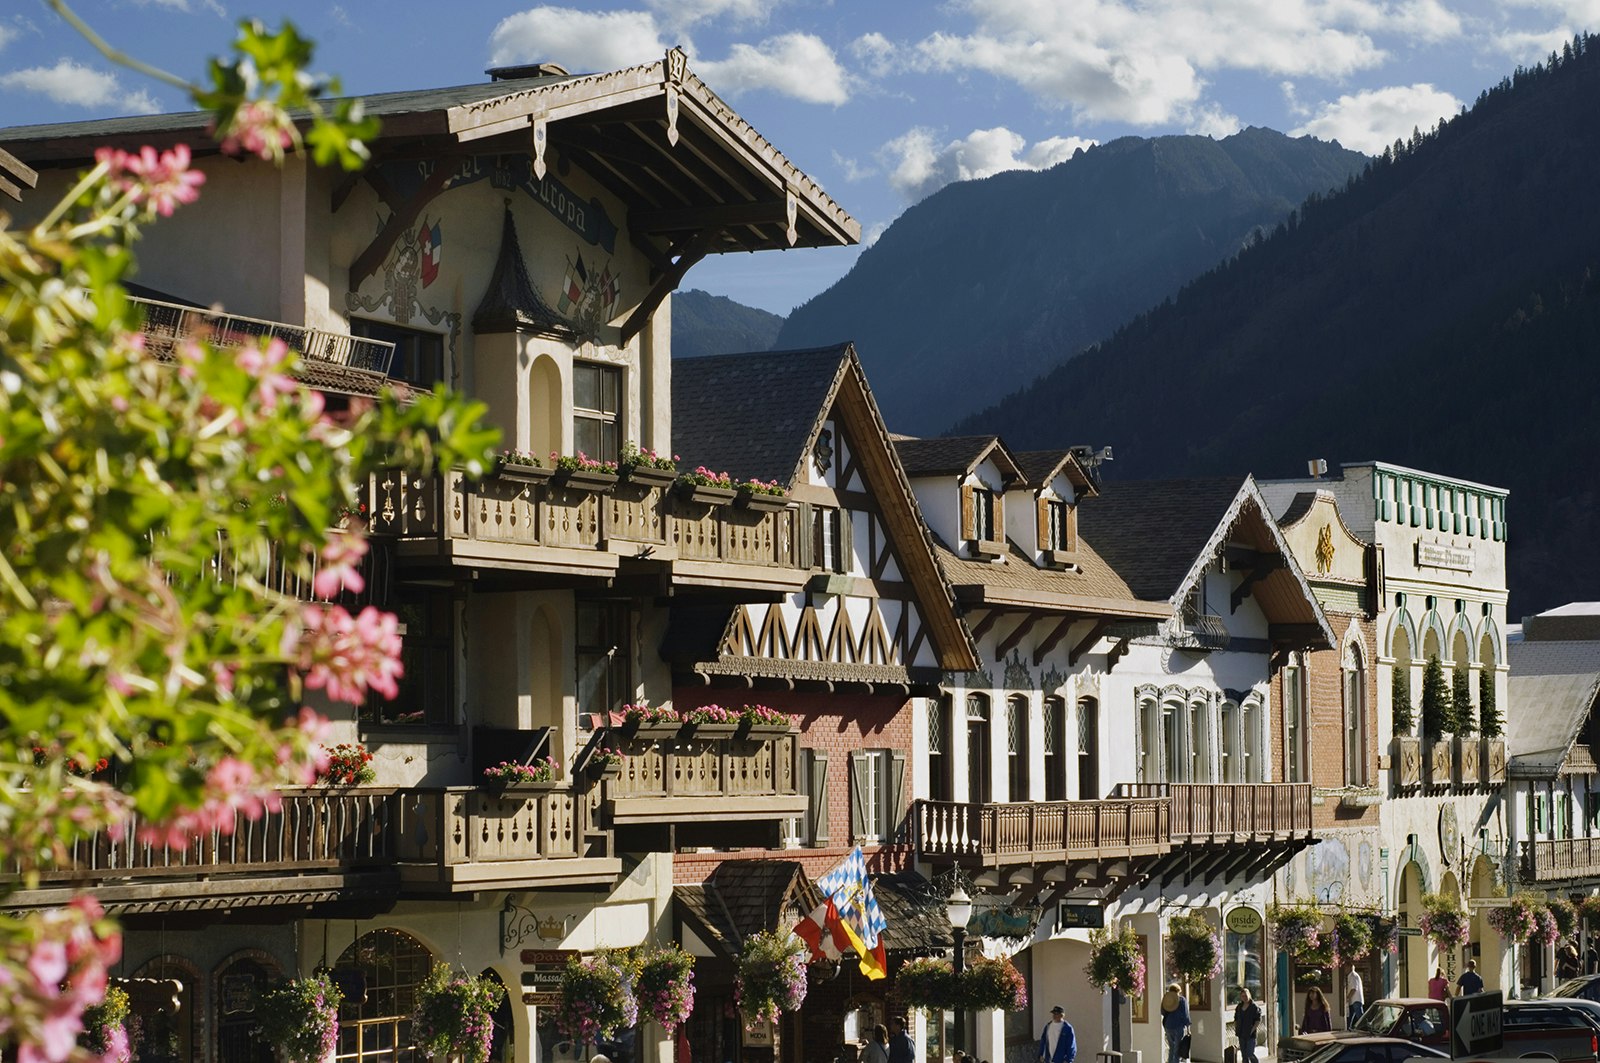 Skyline of the timbered buildings in Leavenworth, Washington 